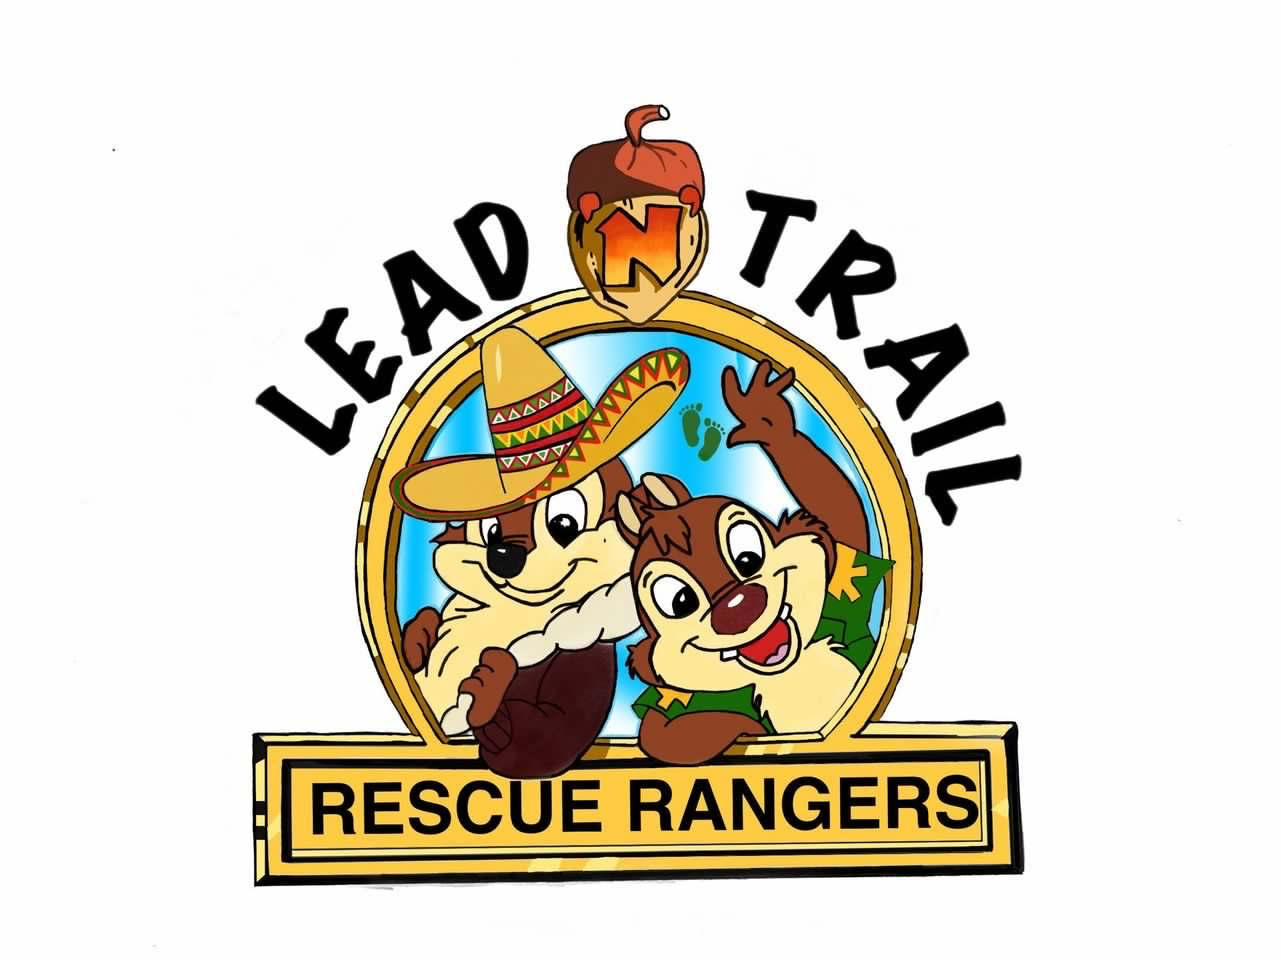 Rescue Rangers Patches